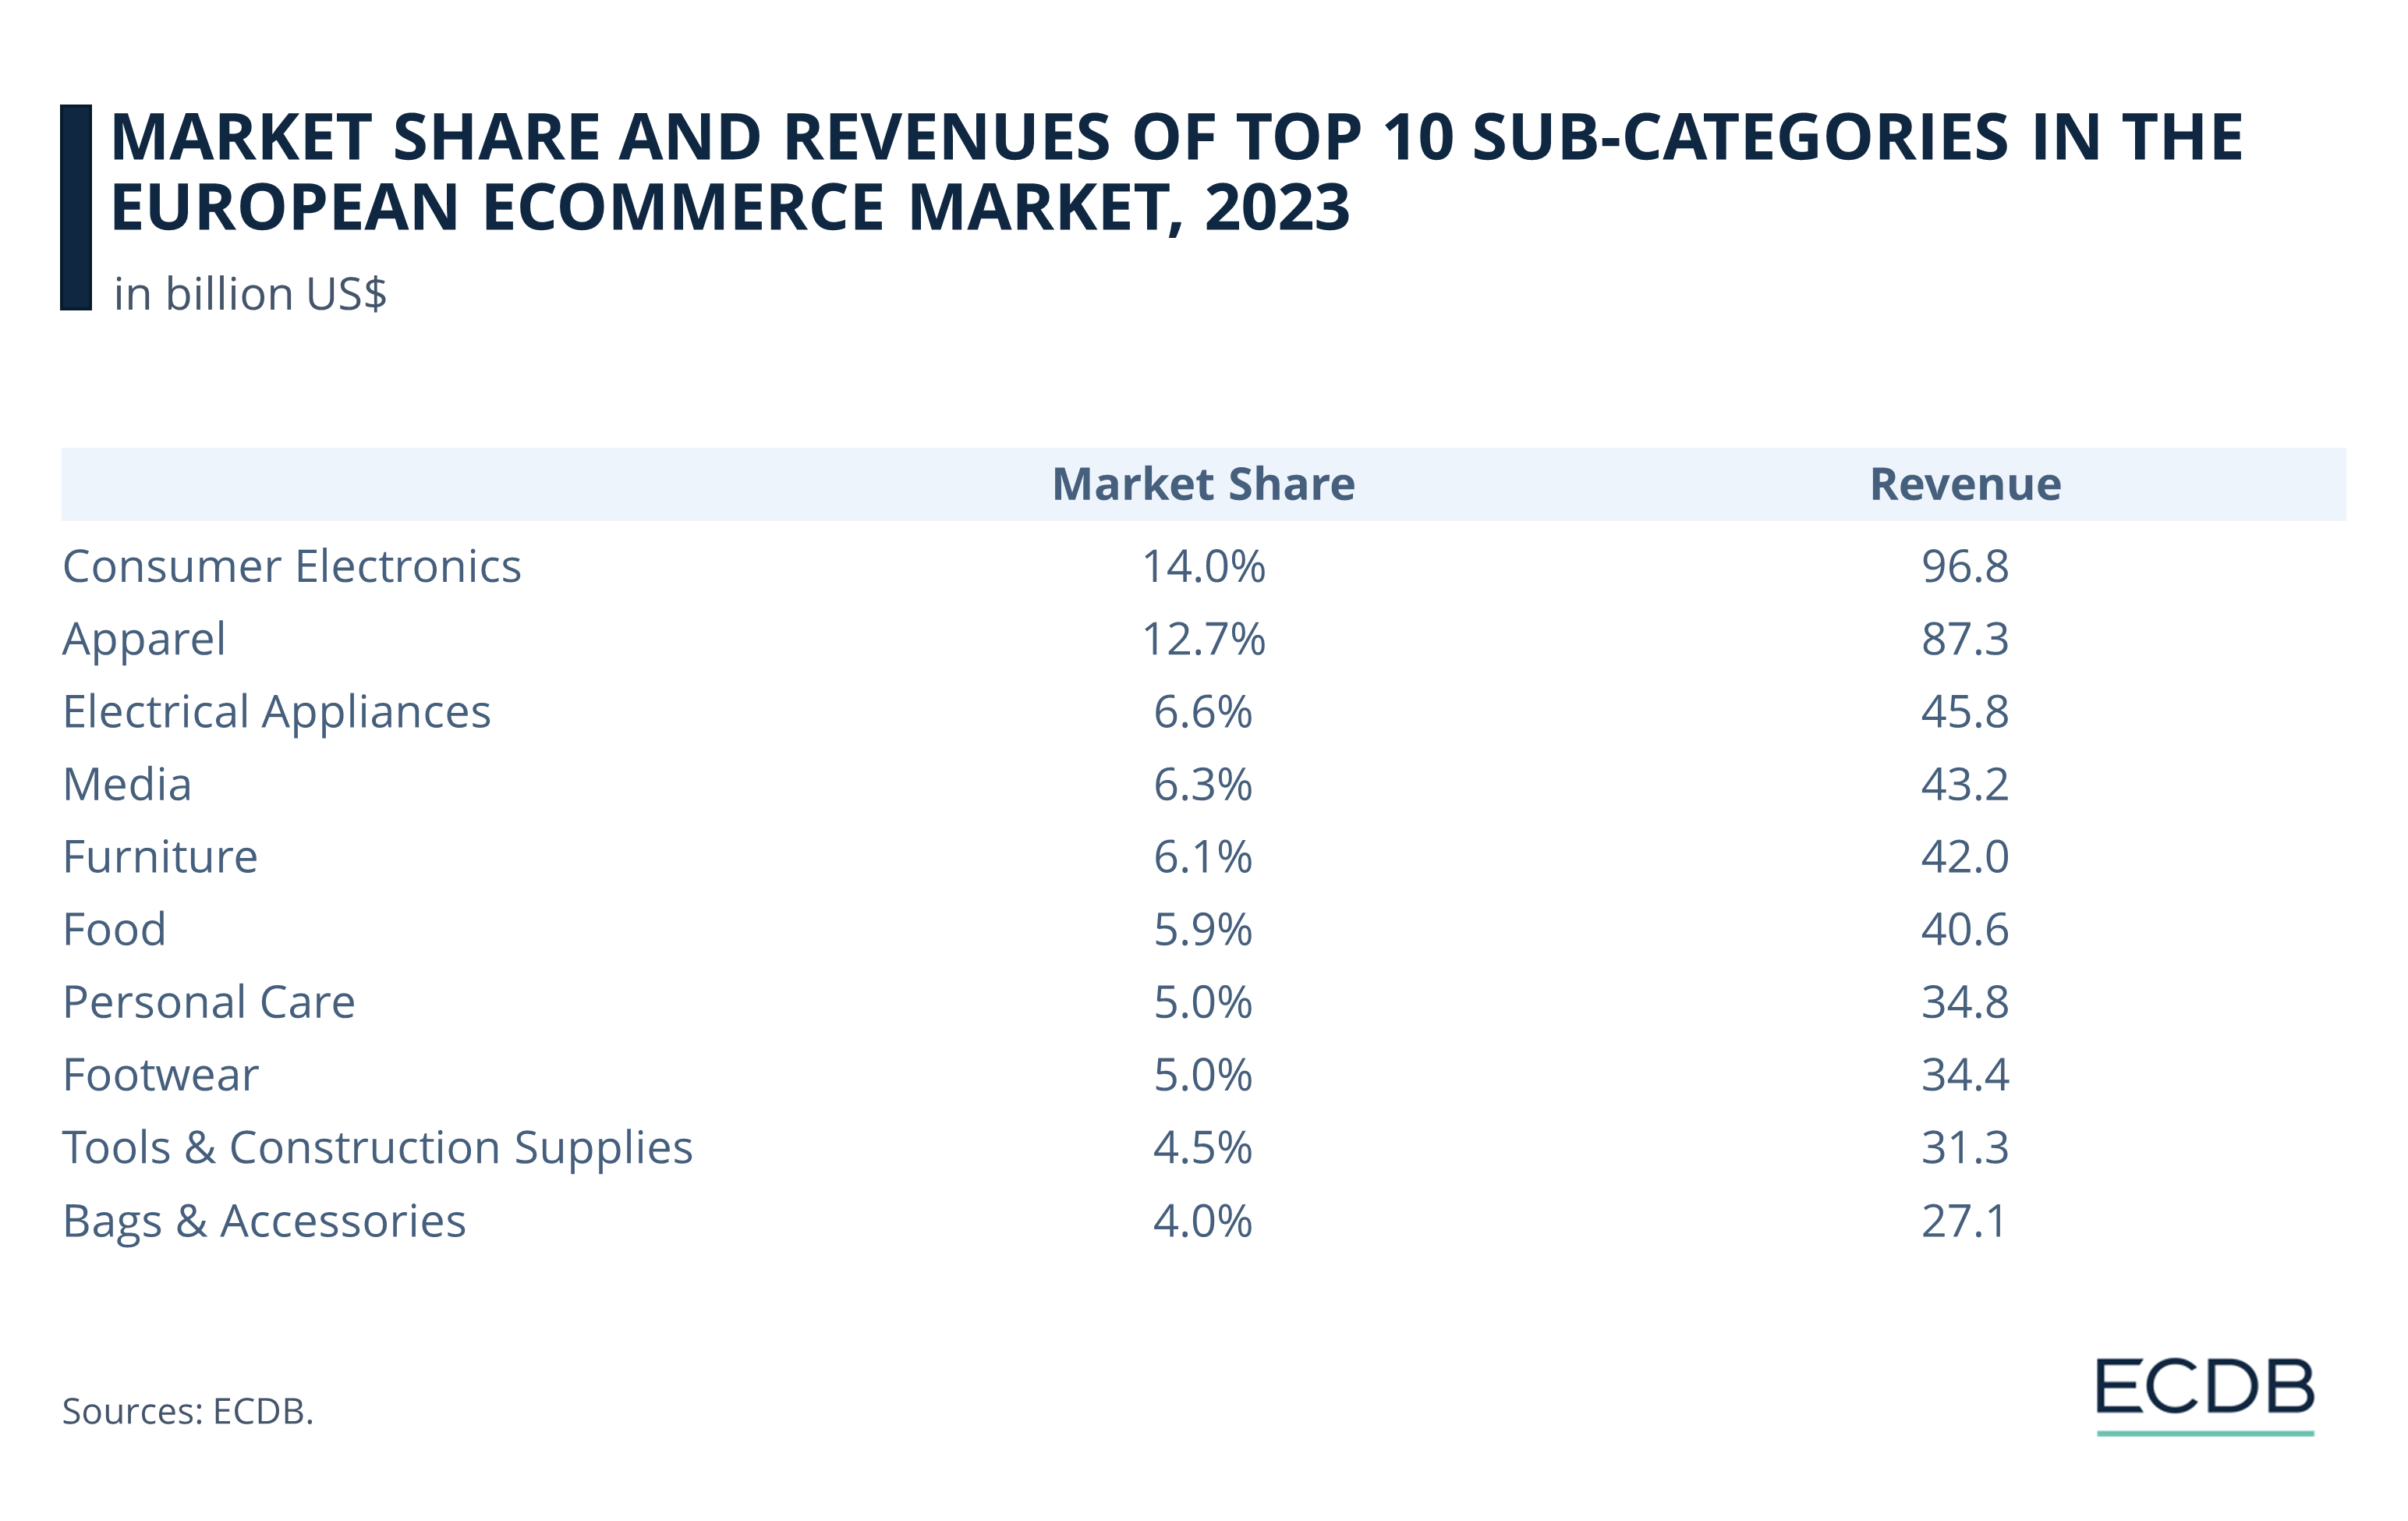 Market Share and Revenues of Top 10 Sub-Categories in the European eCommerce Market, 2023